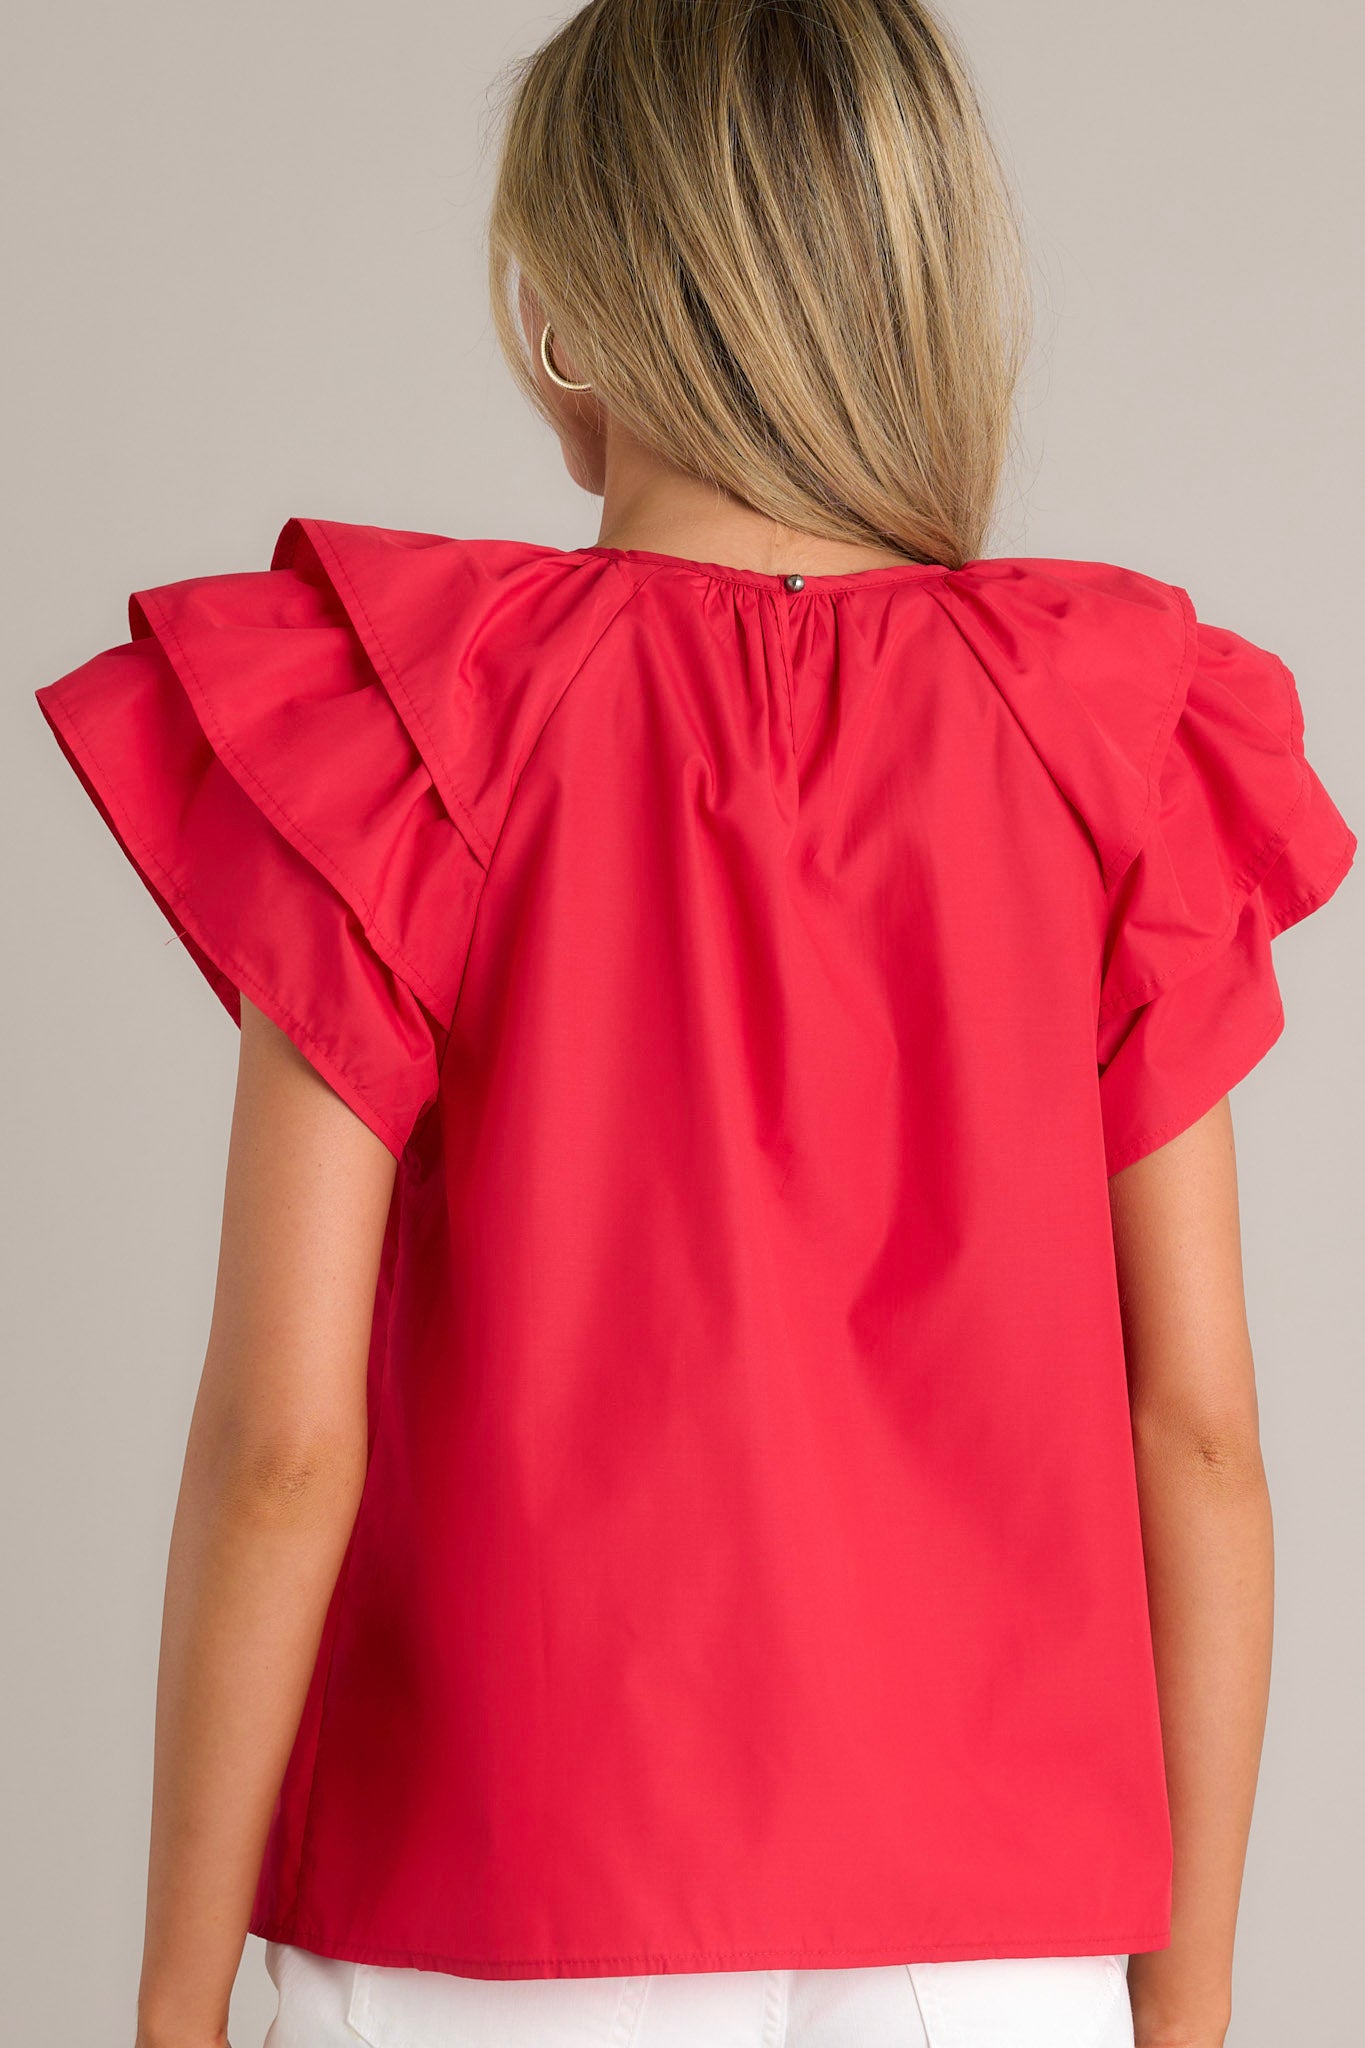 Back view of a red top highlighting the keyhole with a button closure and the ruffled short sleeves.